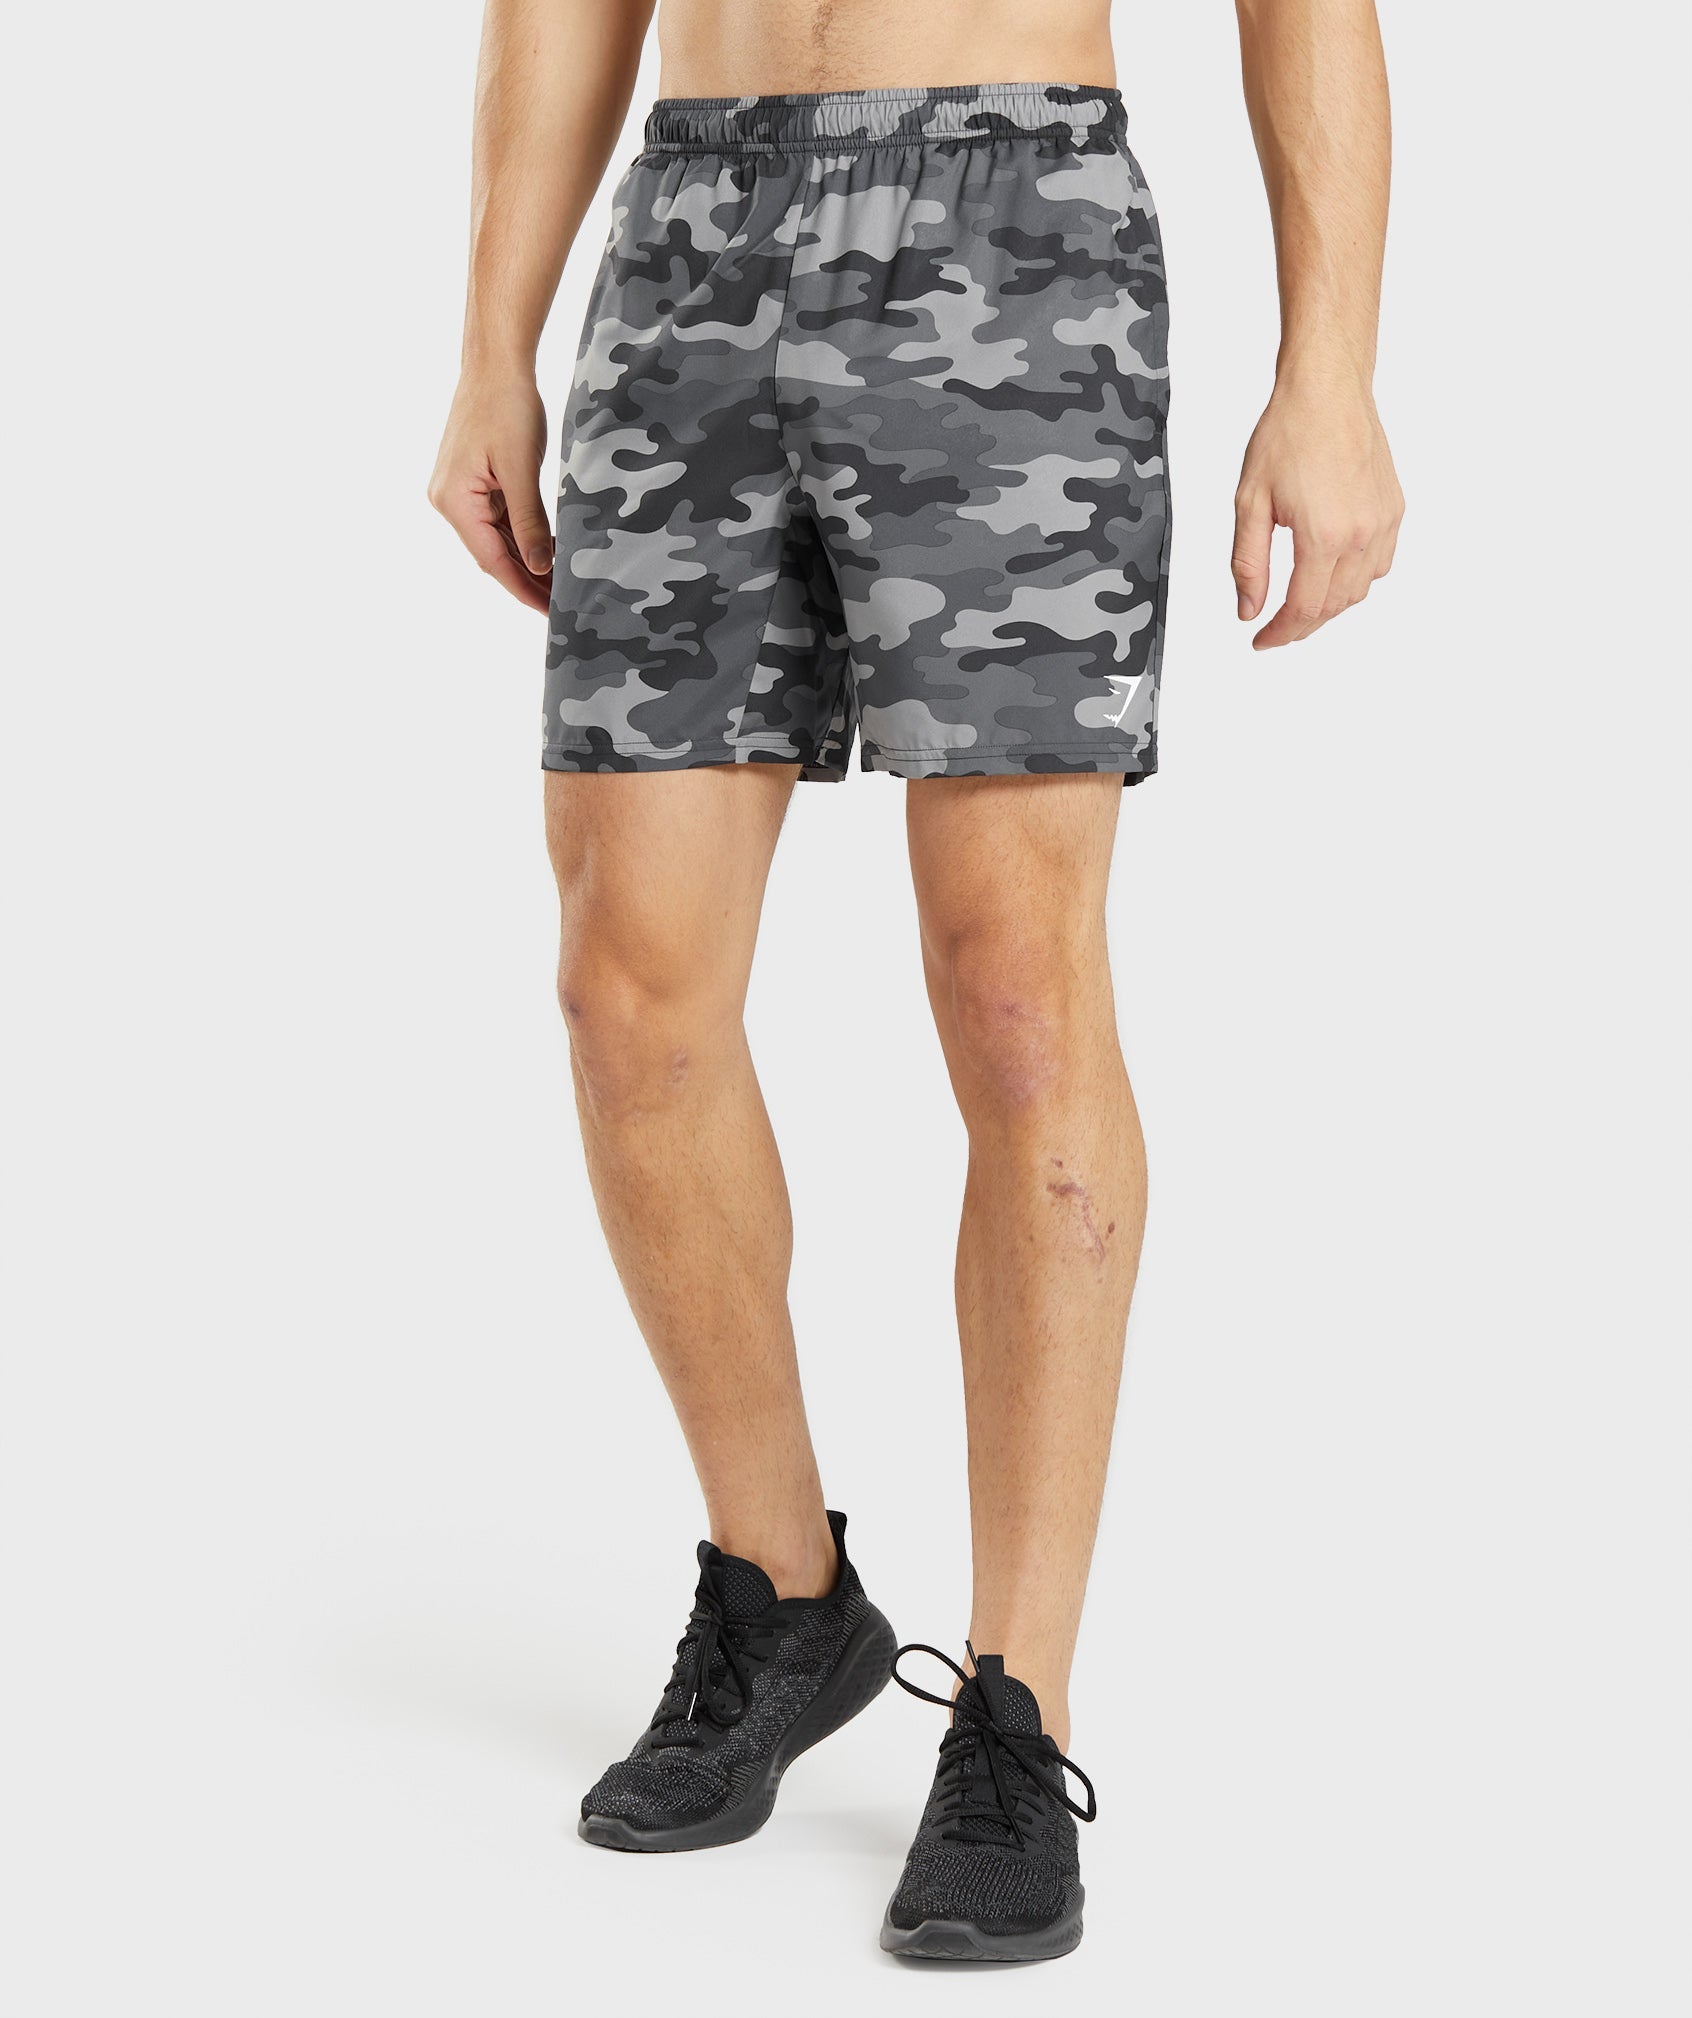 Arrival Shorts in Grey Print - view 1